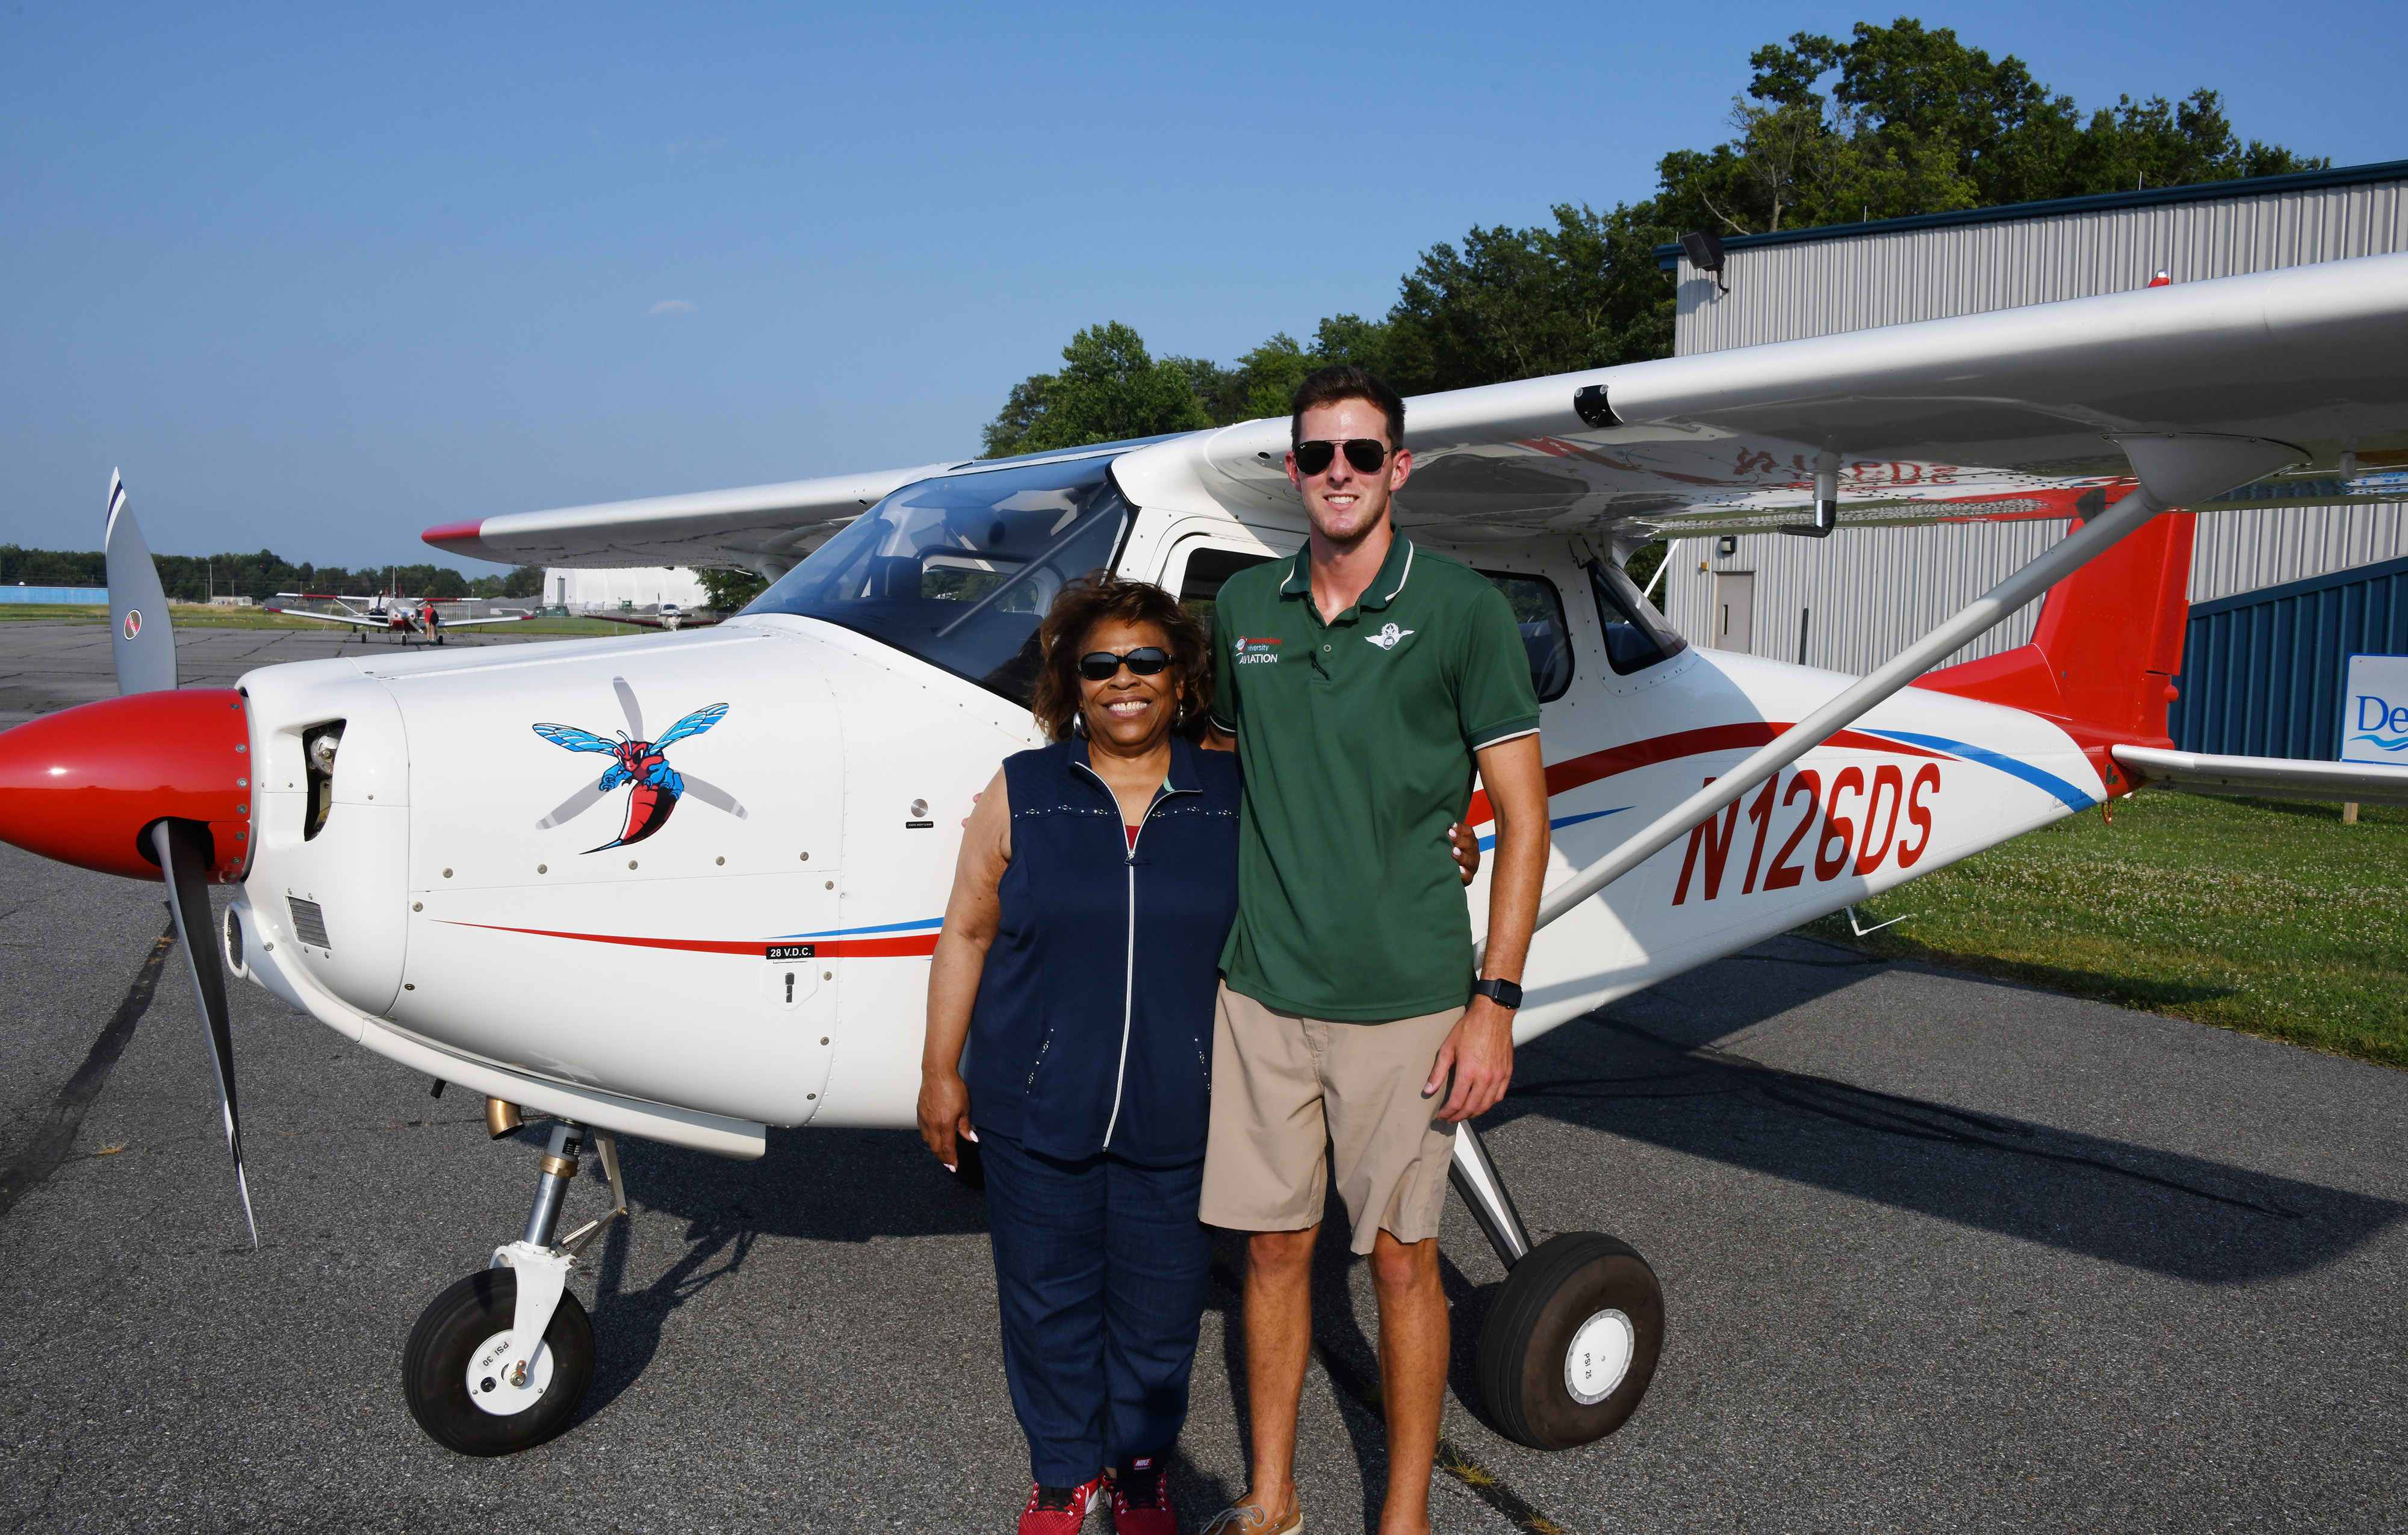 DSU President Wilma Mishoe poses with Aviation Program graduate and current Instructor B. Lane DeLeon after flying into the Delaware Air Park on the first aircraft of a new fleet planes for the University. 